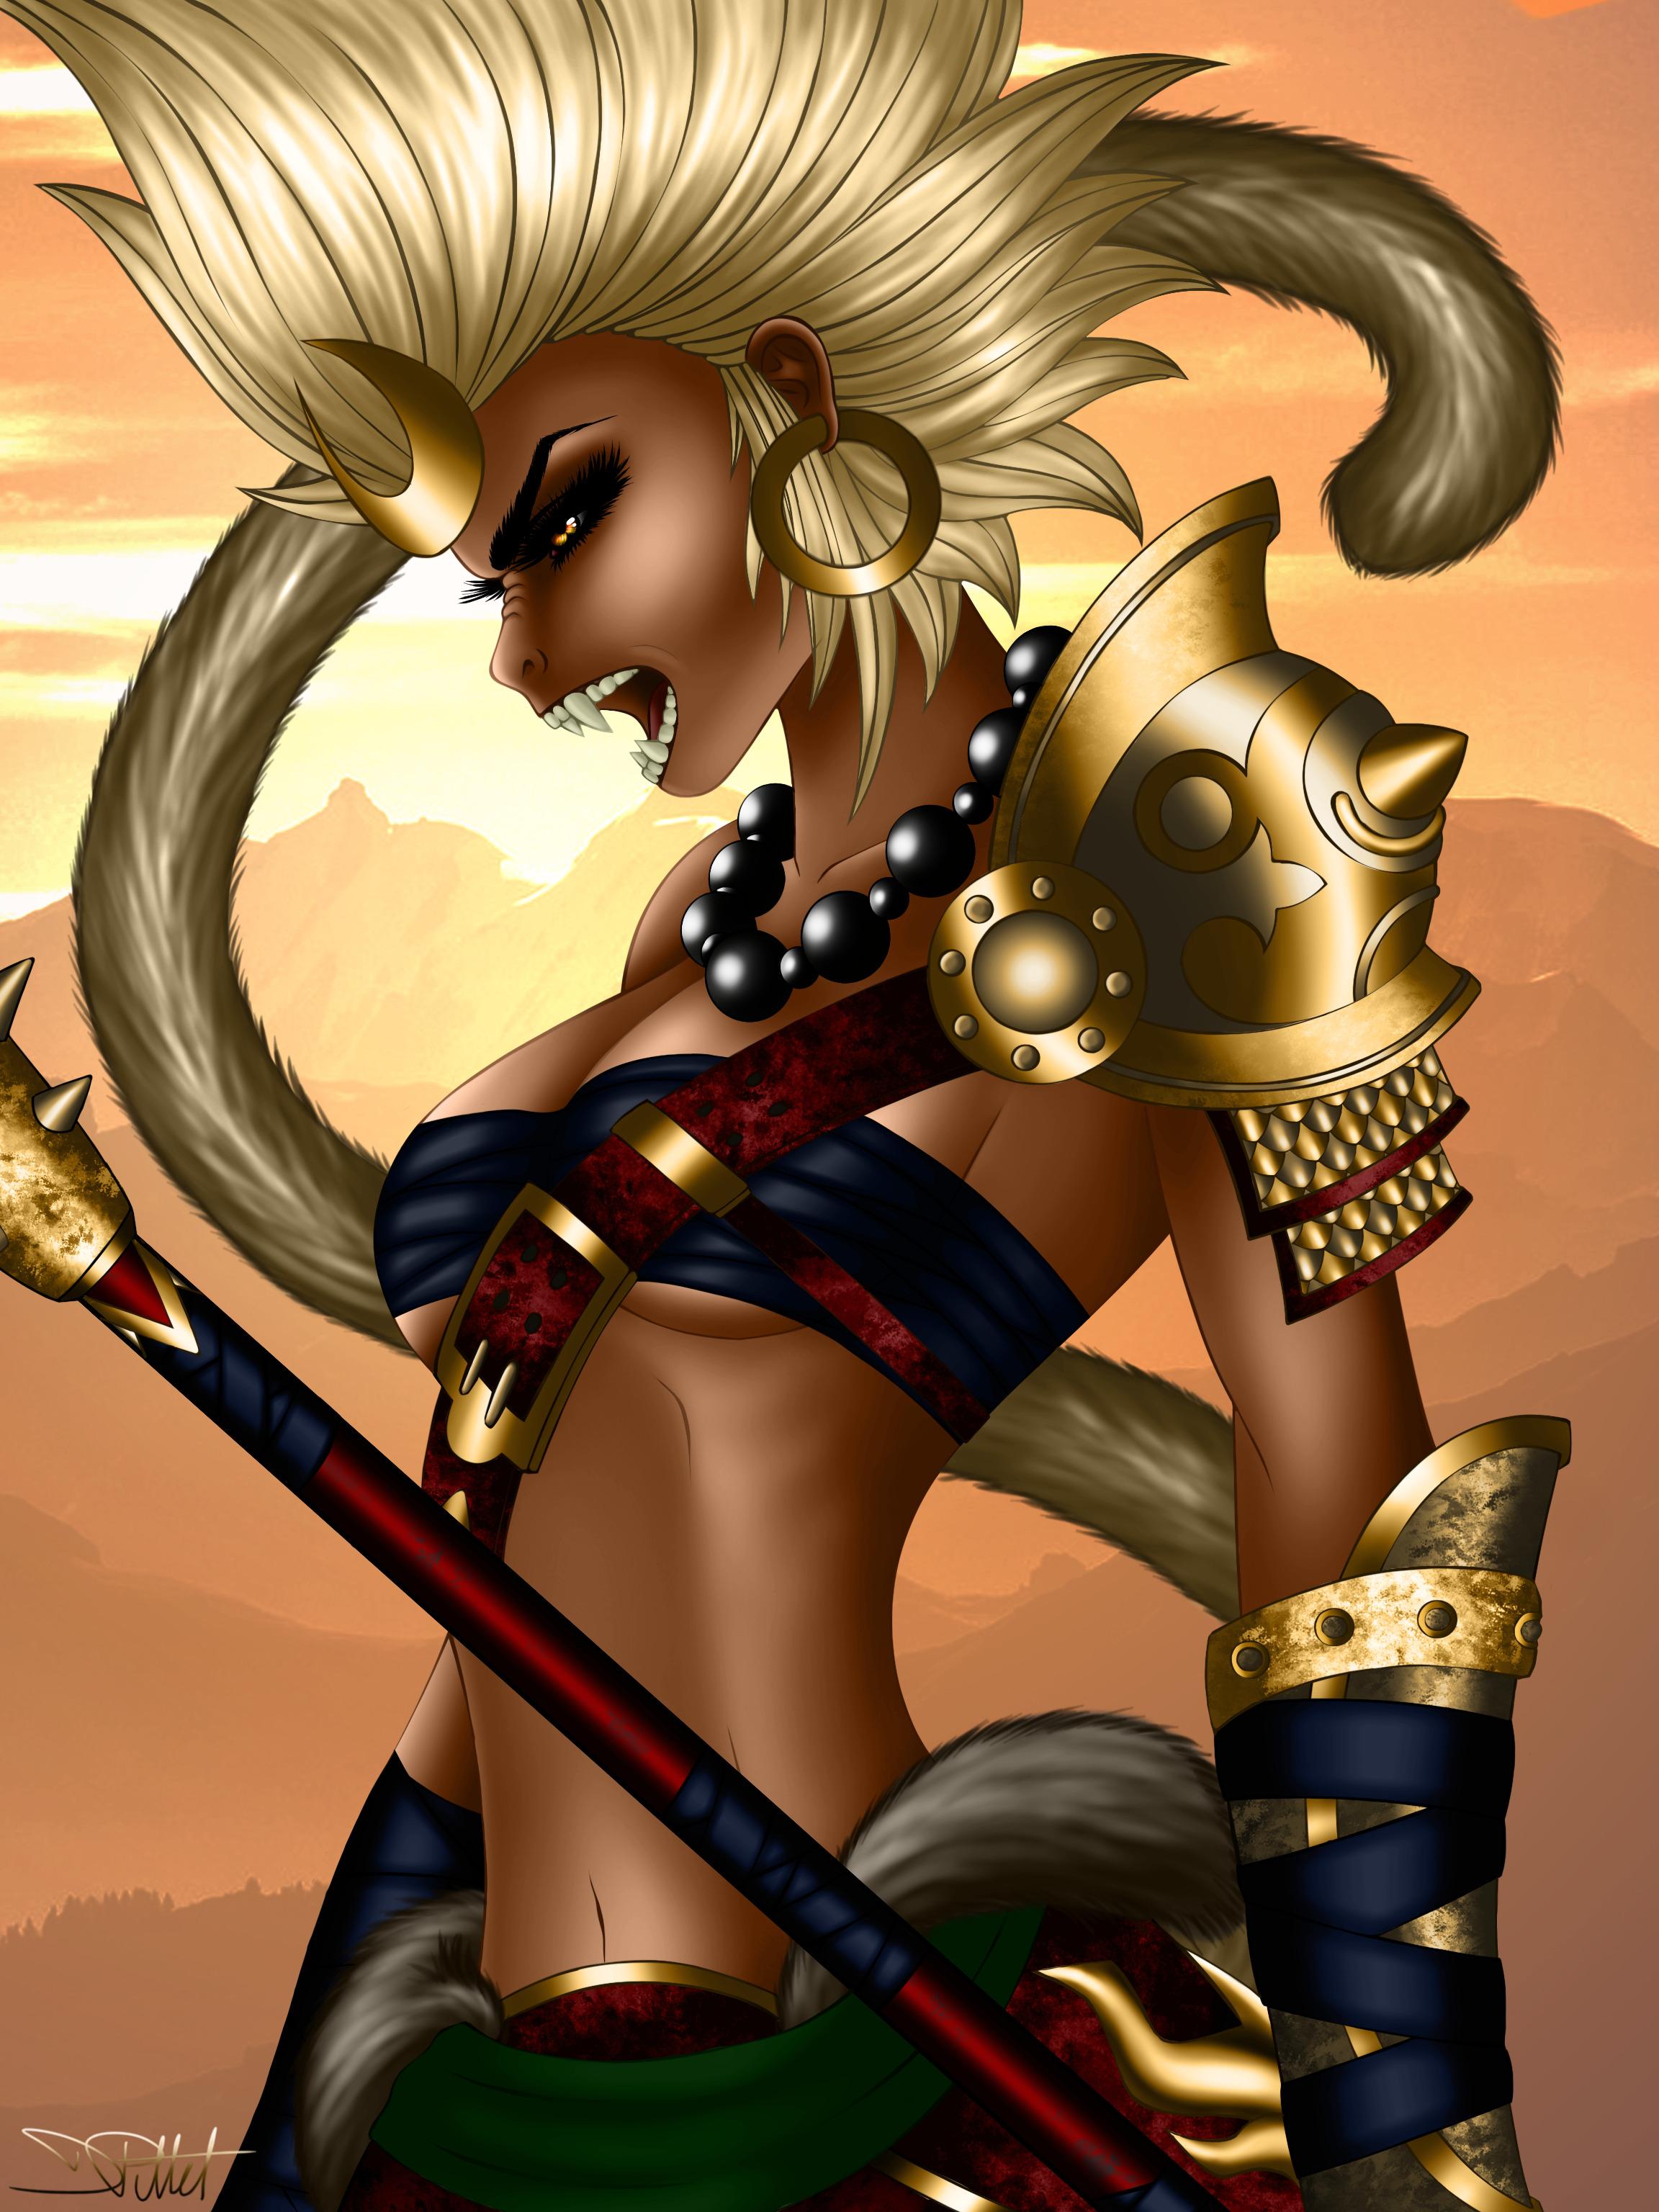 A Nonyme Art Female Version Of Sun Wukong Hope You Like Her Smitegame Smiteart Http T Co Ingewijnzu Http T Co 21cx1jpl1h Twitter